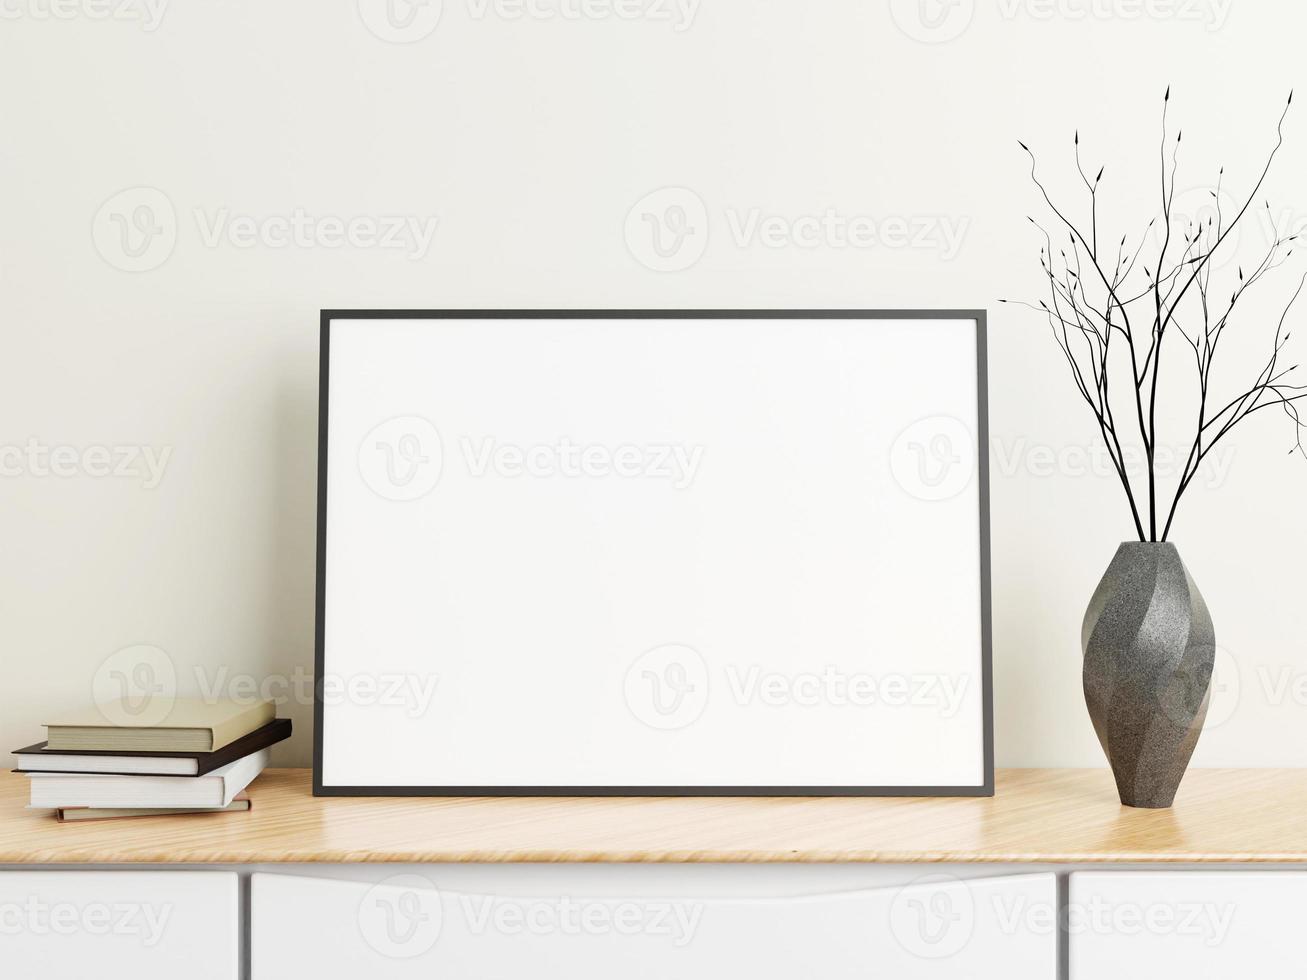 https://static.vecteezy.com/system/resources/previews/006/968/167/non_2x/minimalist-horizontal-black-poster-or-frame-mockup-on-wood-table-with-books-and-vase-in-a-room-3d-rendering-photo.jpg